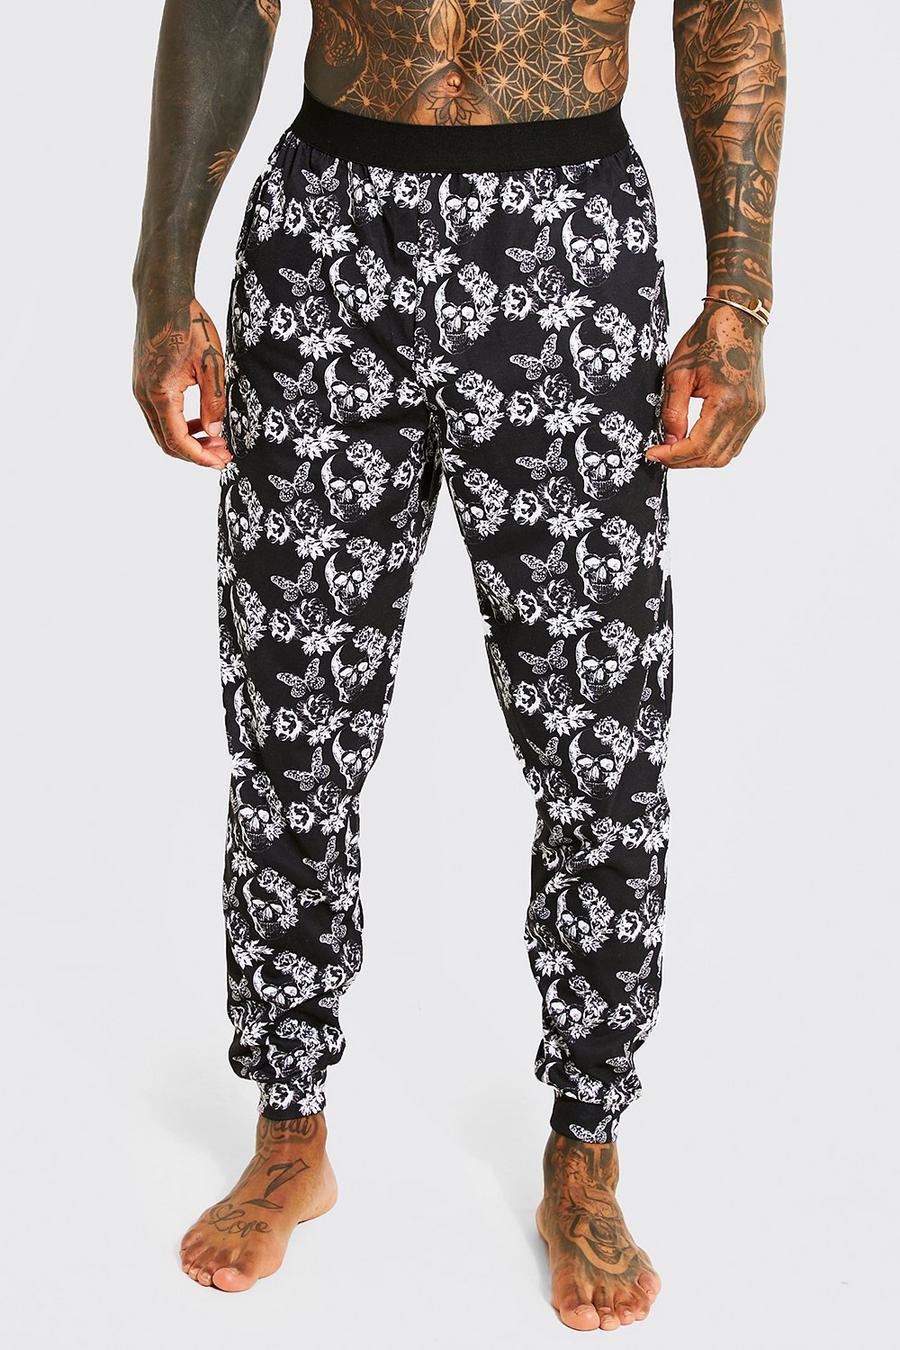 Black Skull And Roses All Over Loungewear Print image number 1